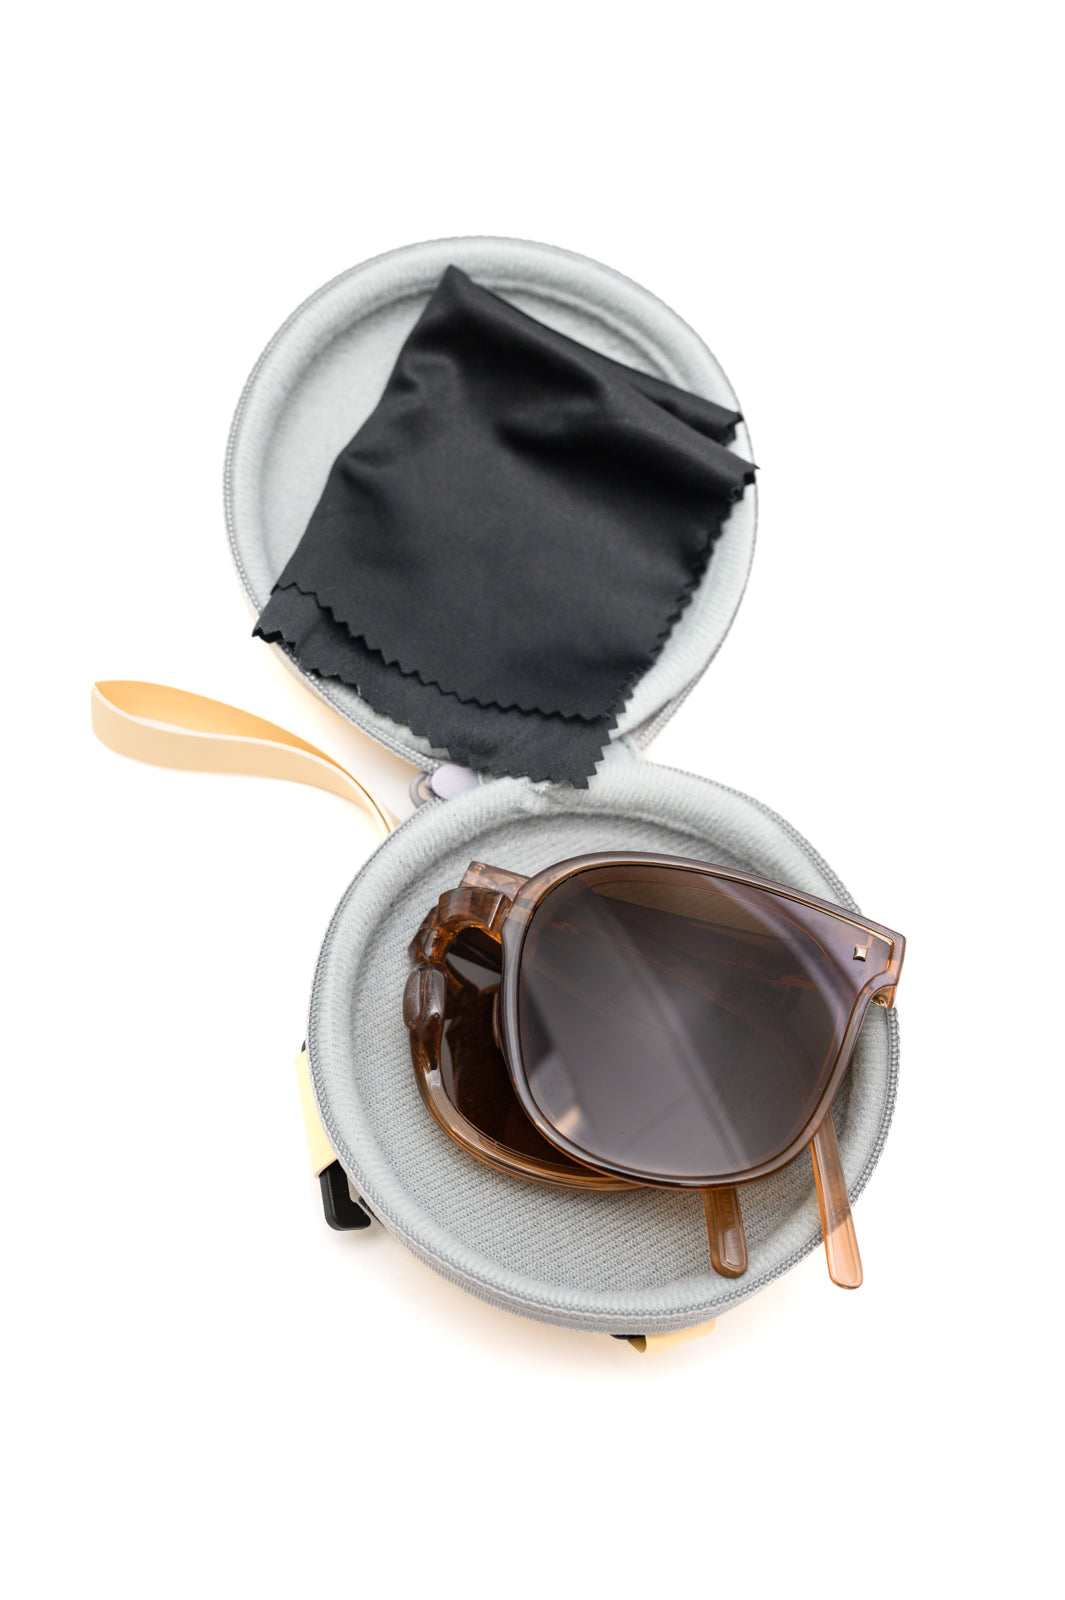 Collapsible Girlfriend Sunnies & Case in Champagne (Ships in 1-2 Weeks)